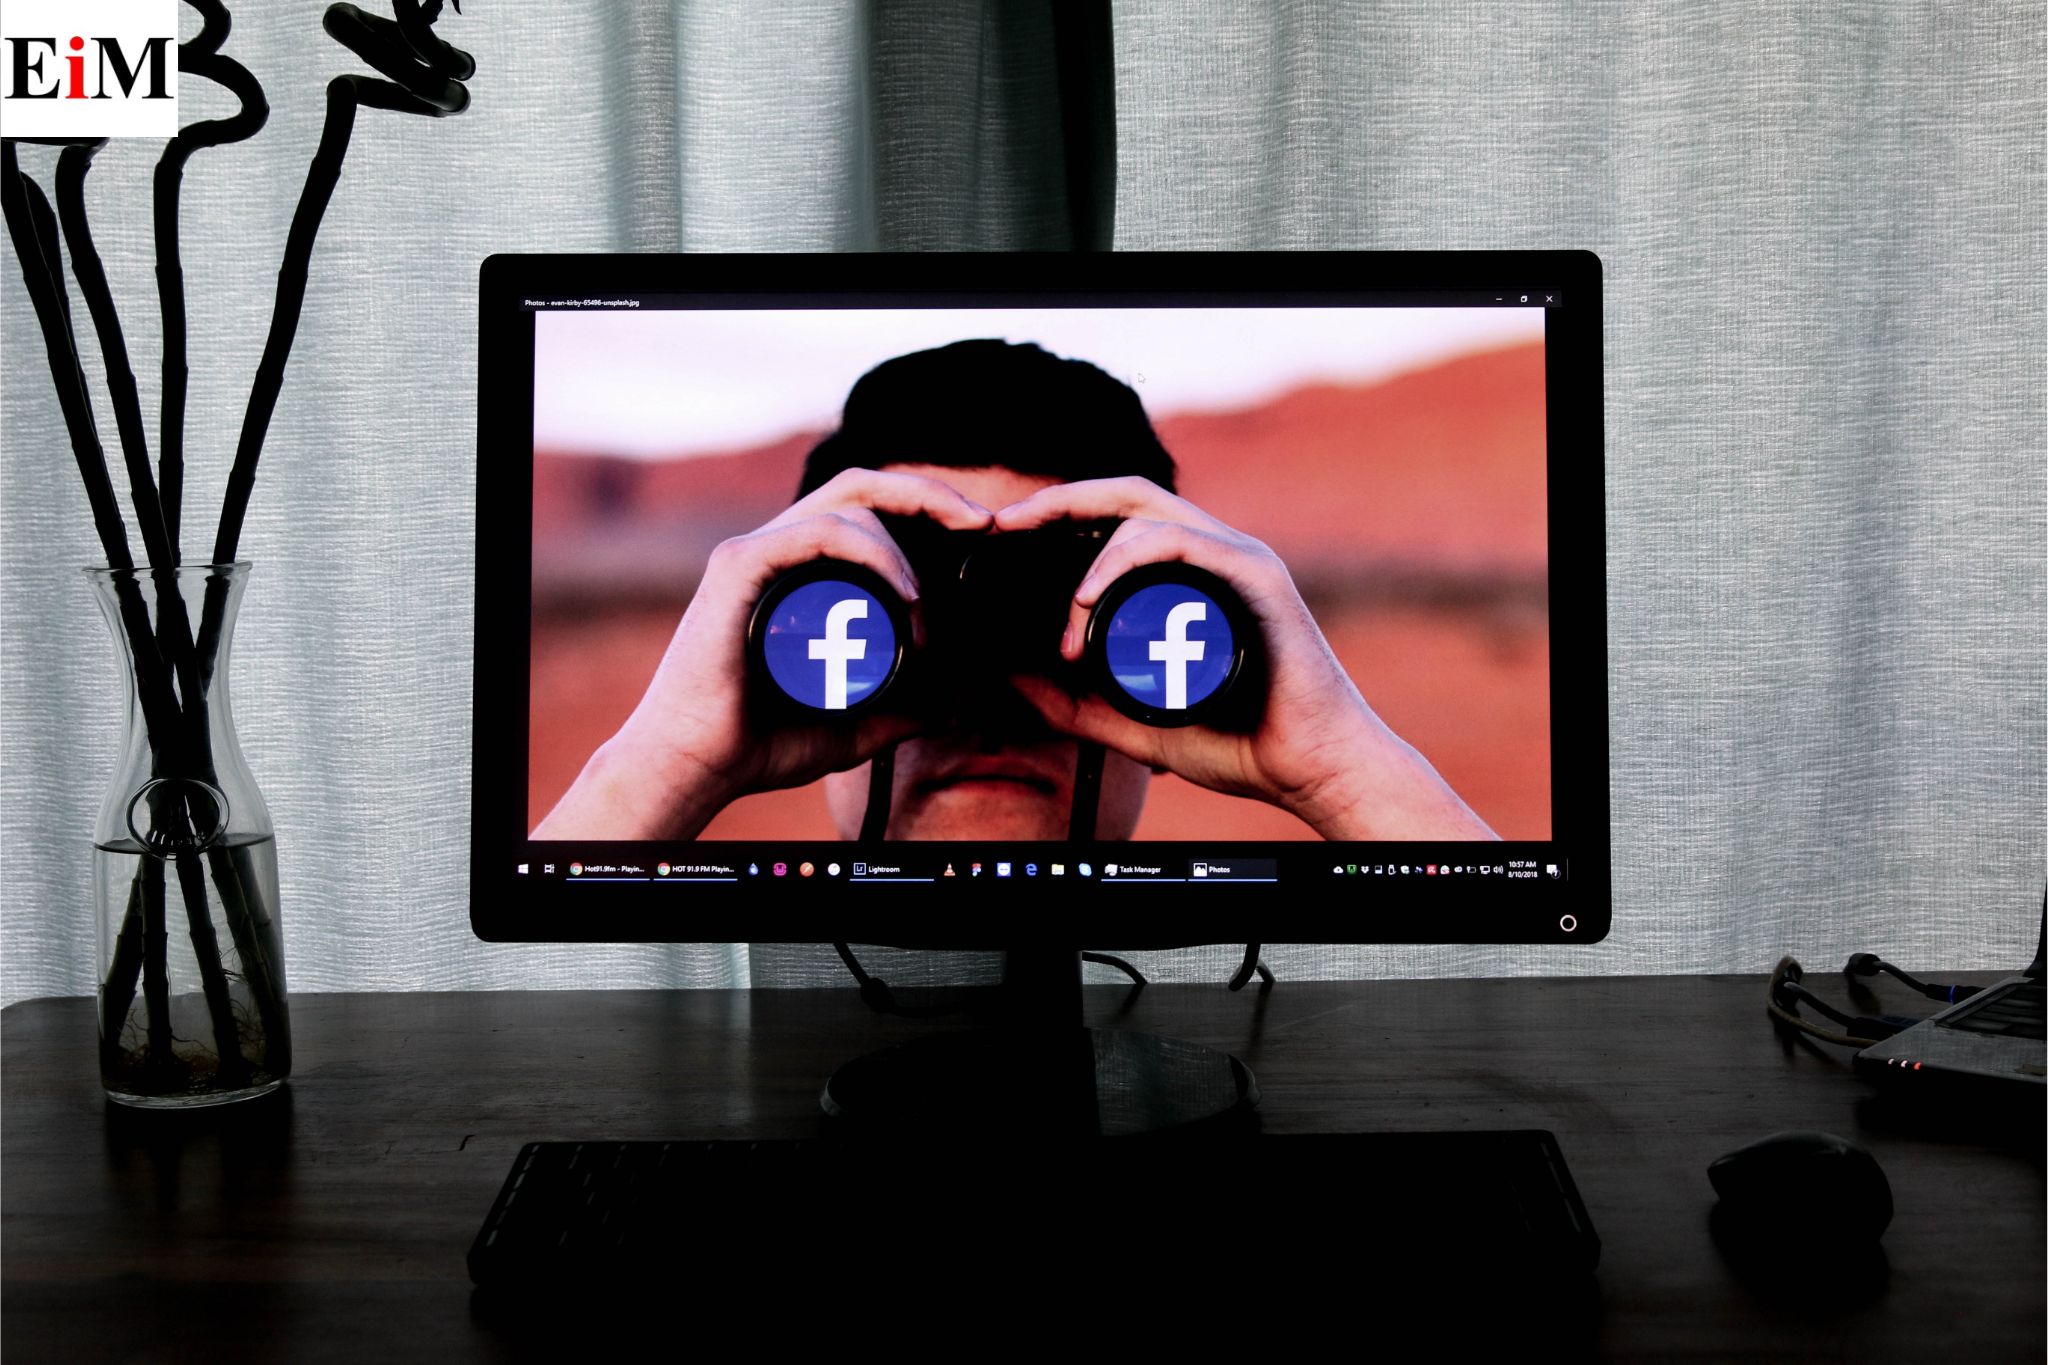 Facebook Ads are using Malware to Steal Data from Businesses